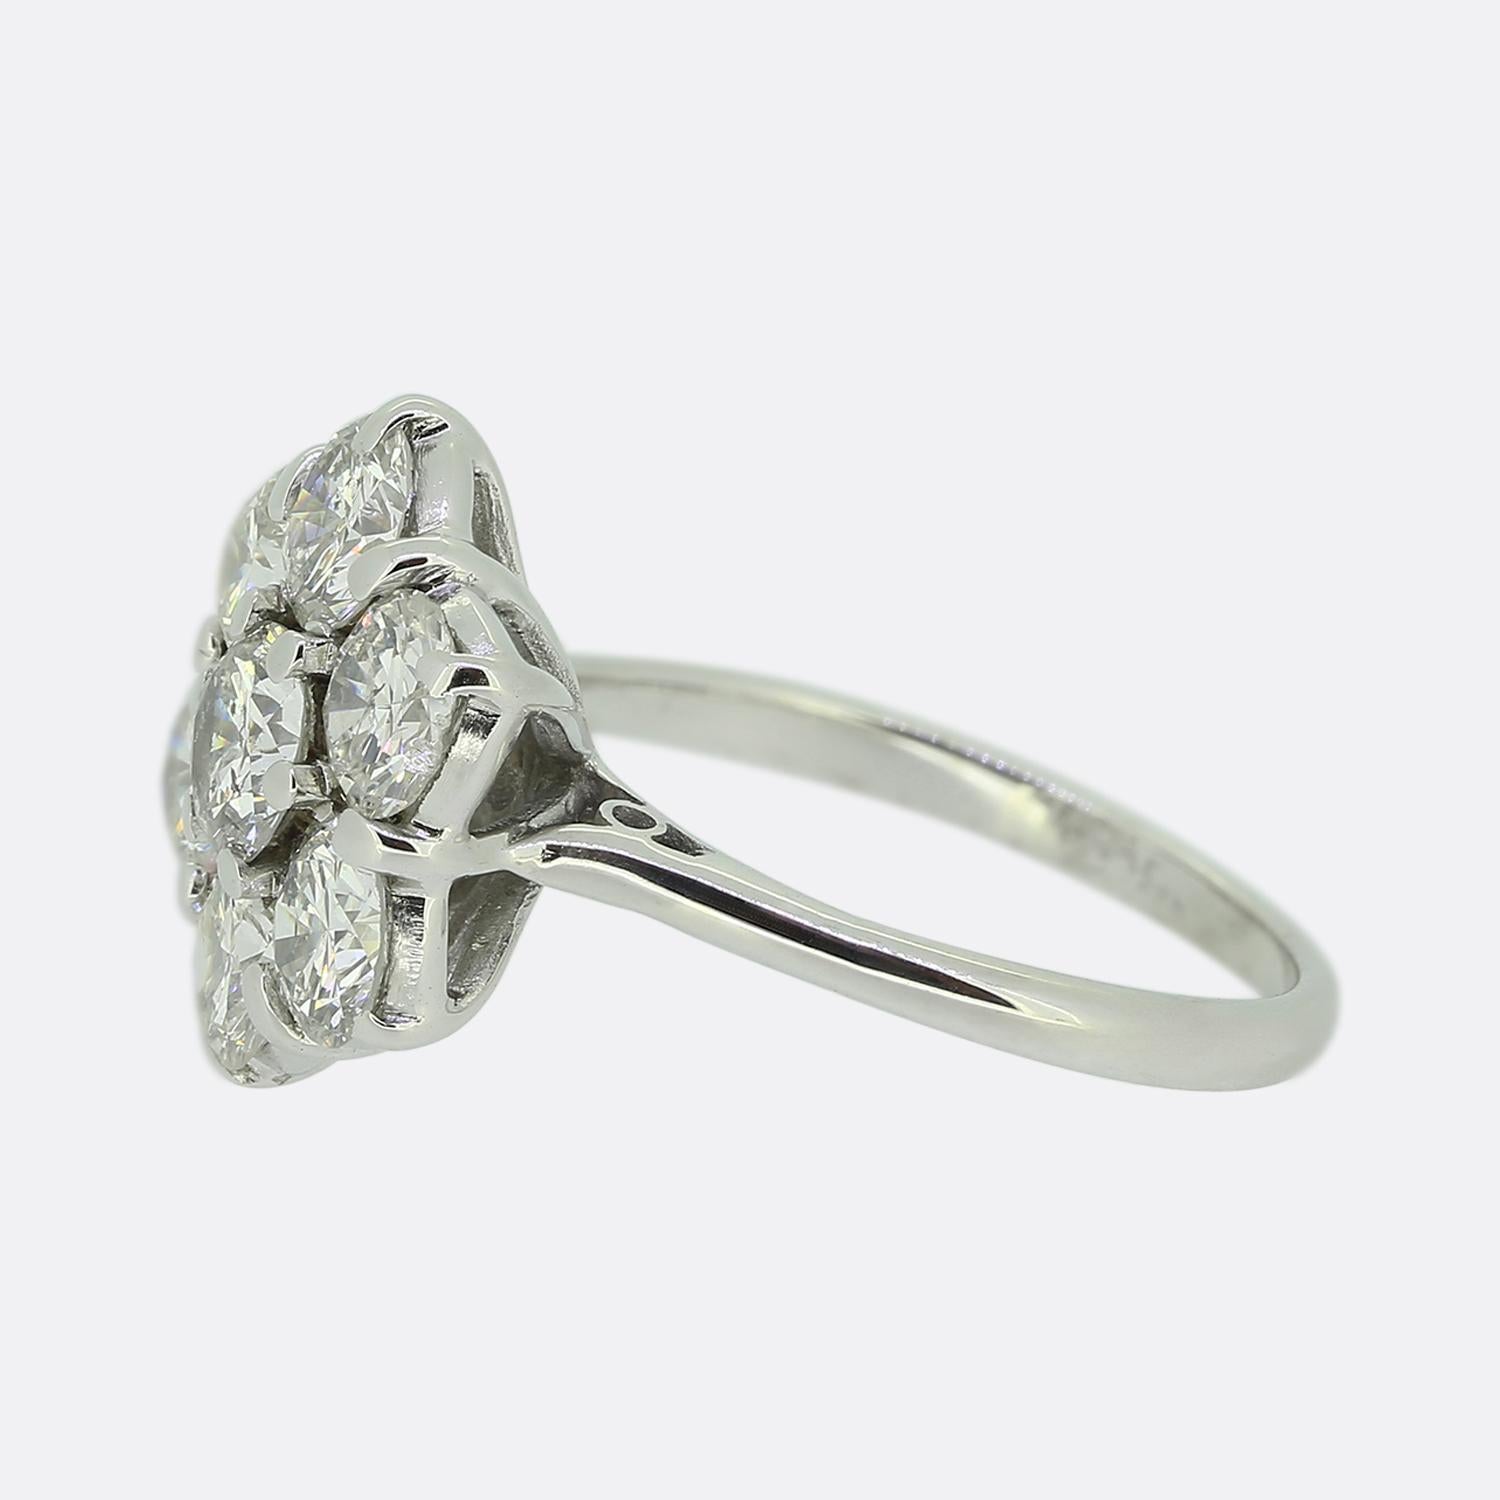 Here we have a gorgeous diamond daisy cluster ring. A single round brilliant cut diamond sits slightly risen at the centre of the face in a six-clawed setting. This principal stone is then framed around the outer edge by six perfectly matched bright